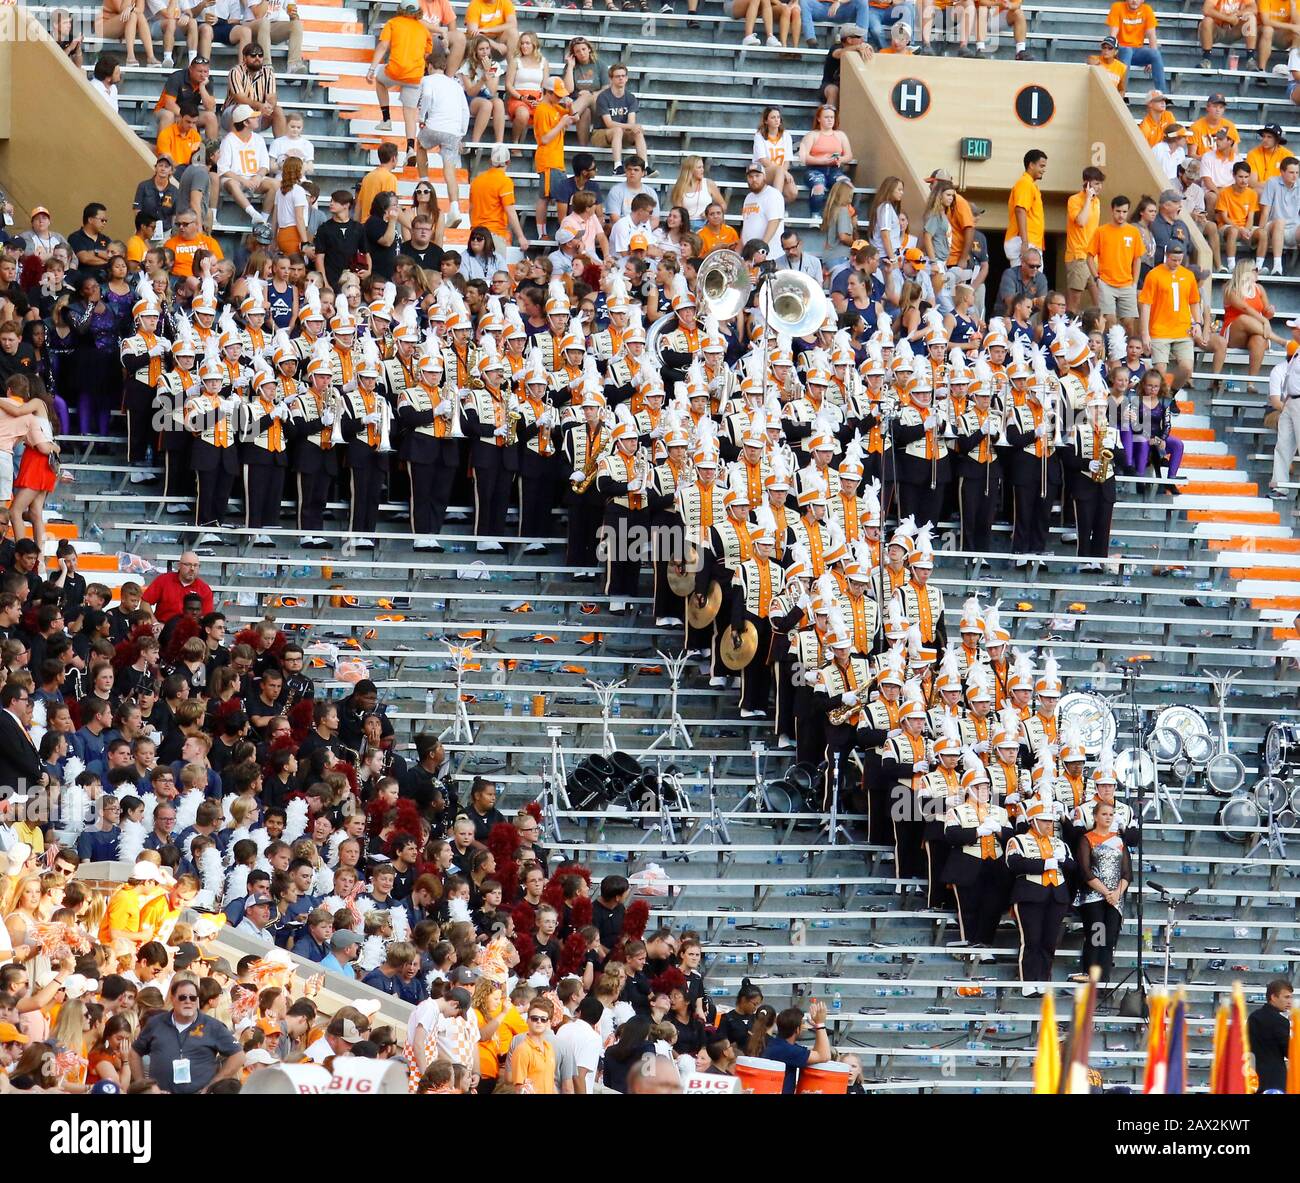 The University of Tennessee Volunteers 'Pride of the Southland Band' marching band forms the letter 'T' during a game on September 7, 2019. Stock Photo